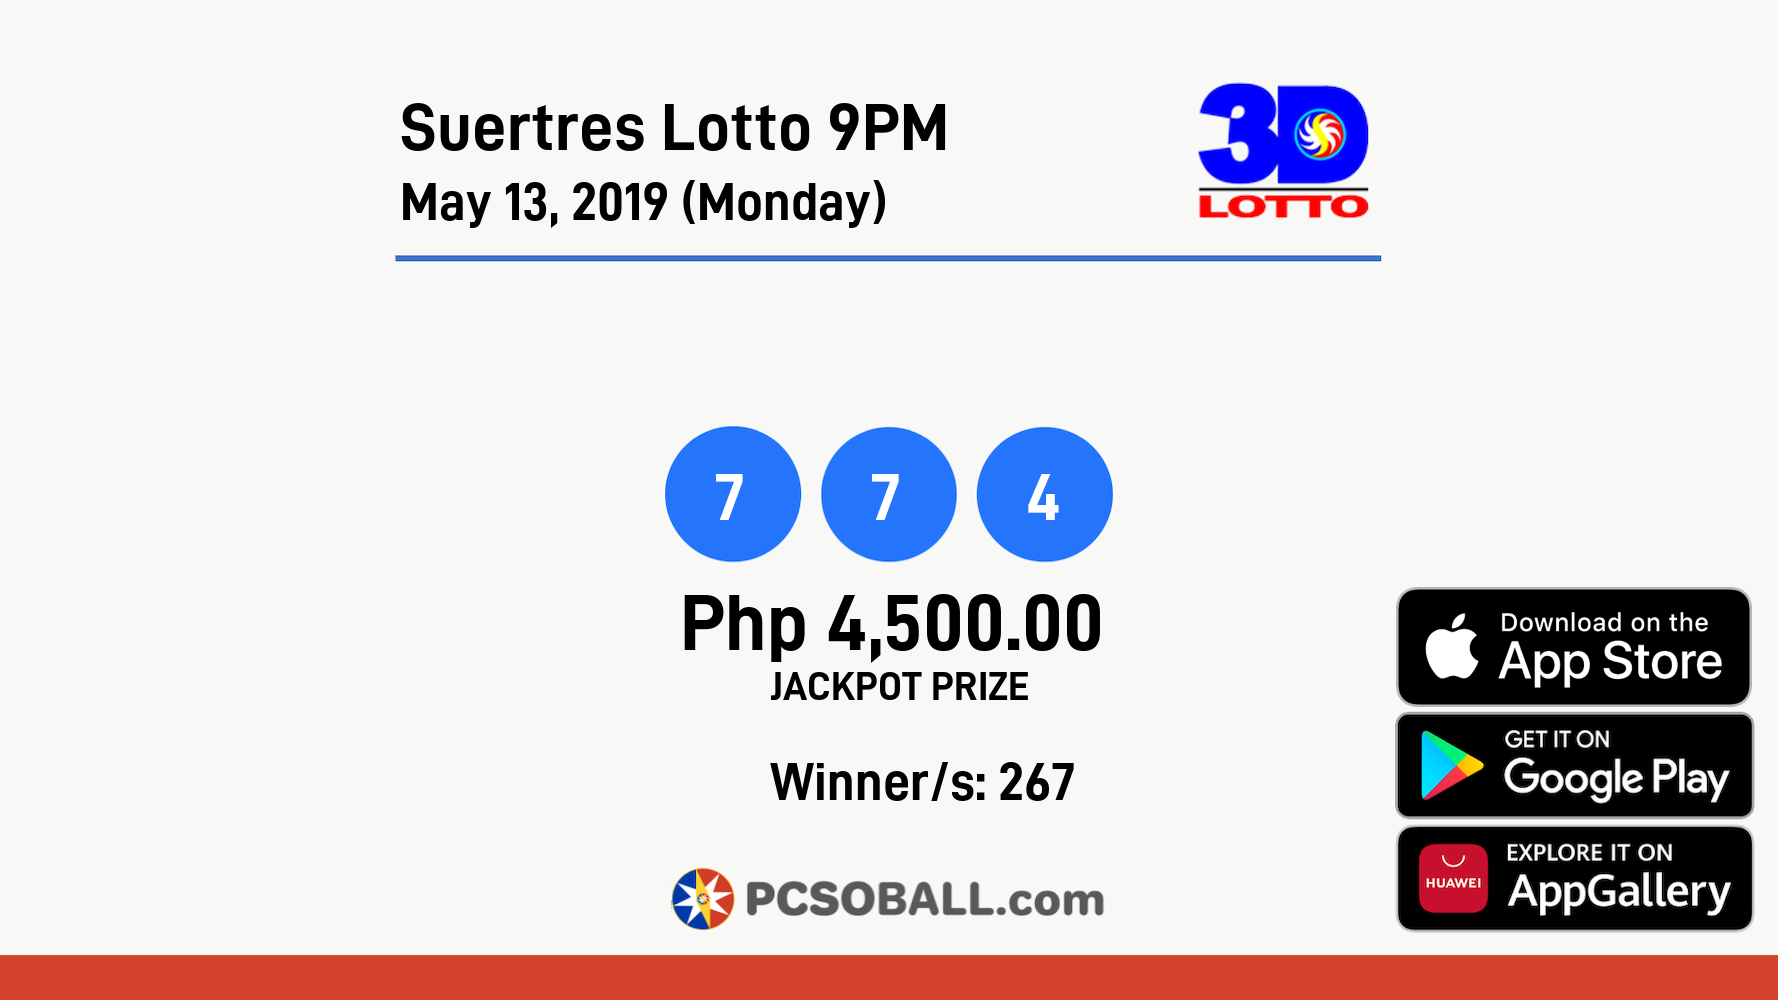 Suertres Lotto 9PM May 13, 2019 (Monday) Result